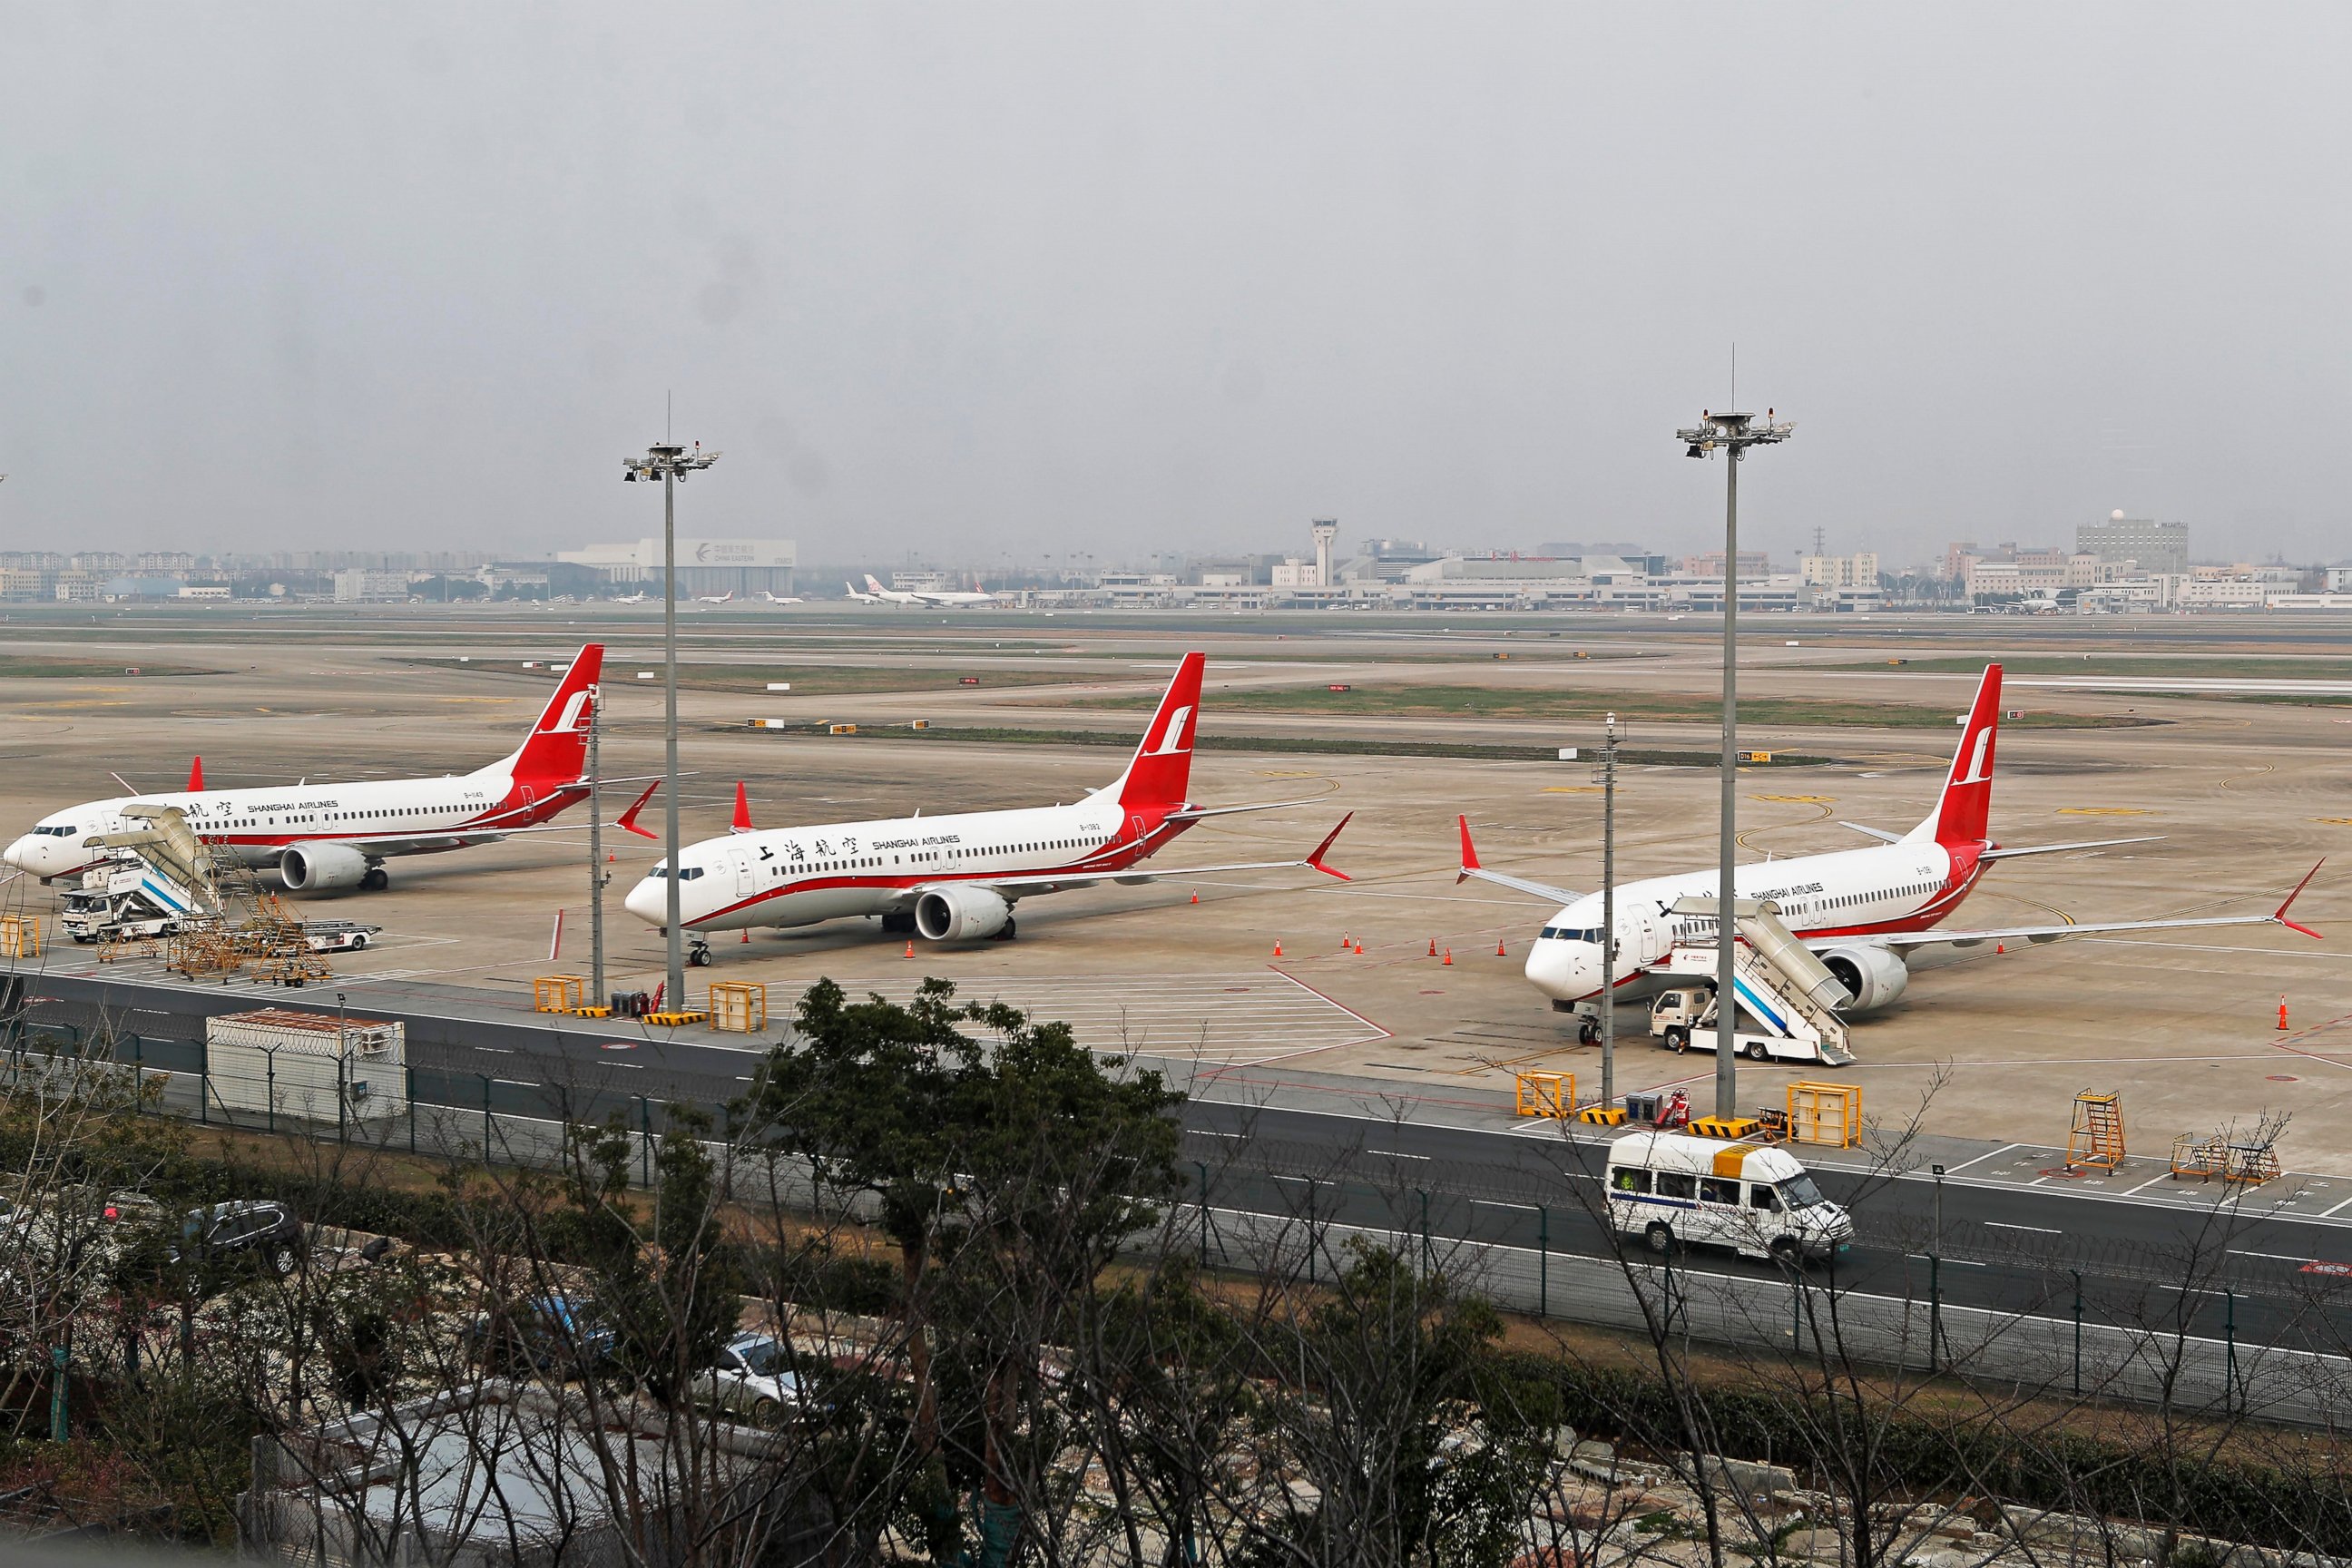 In this photo taken Monday, March 11, 2019, three Shanghai Airlines Boeing 737 Max 8 passenger planes are parked at the Hongqiao Airport in Shanghai, China. U.S. Aviation experts on Tuesday, March 12, 2019 joined the investigation into the crash of a